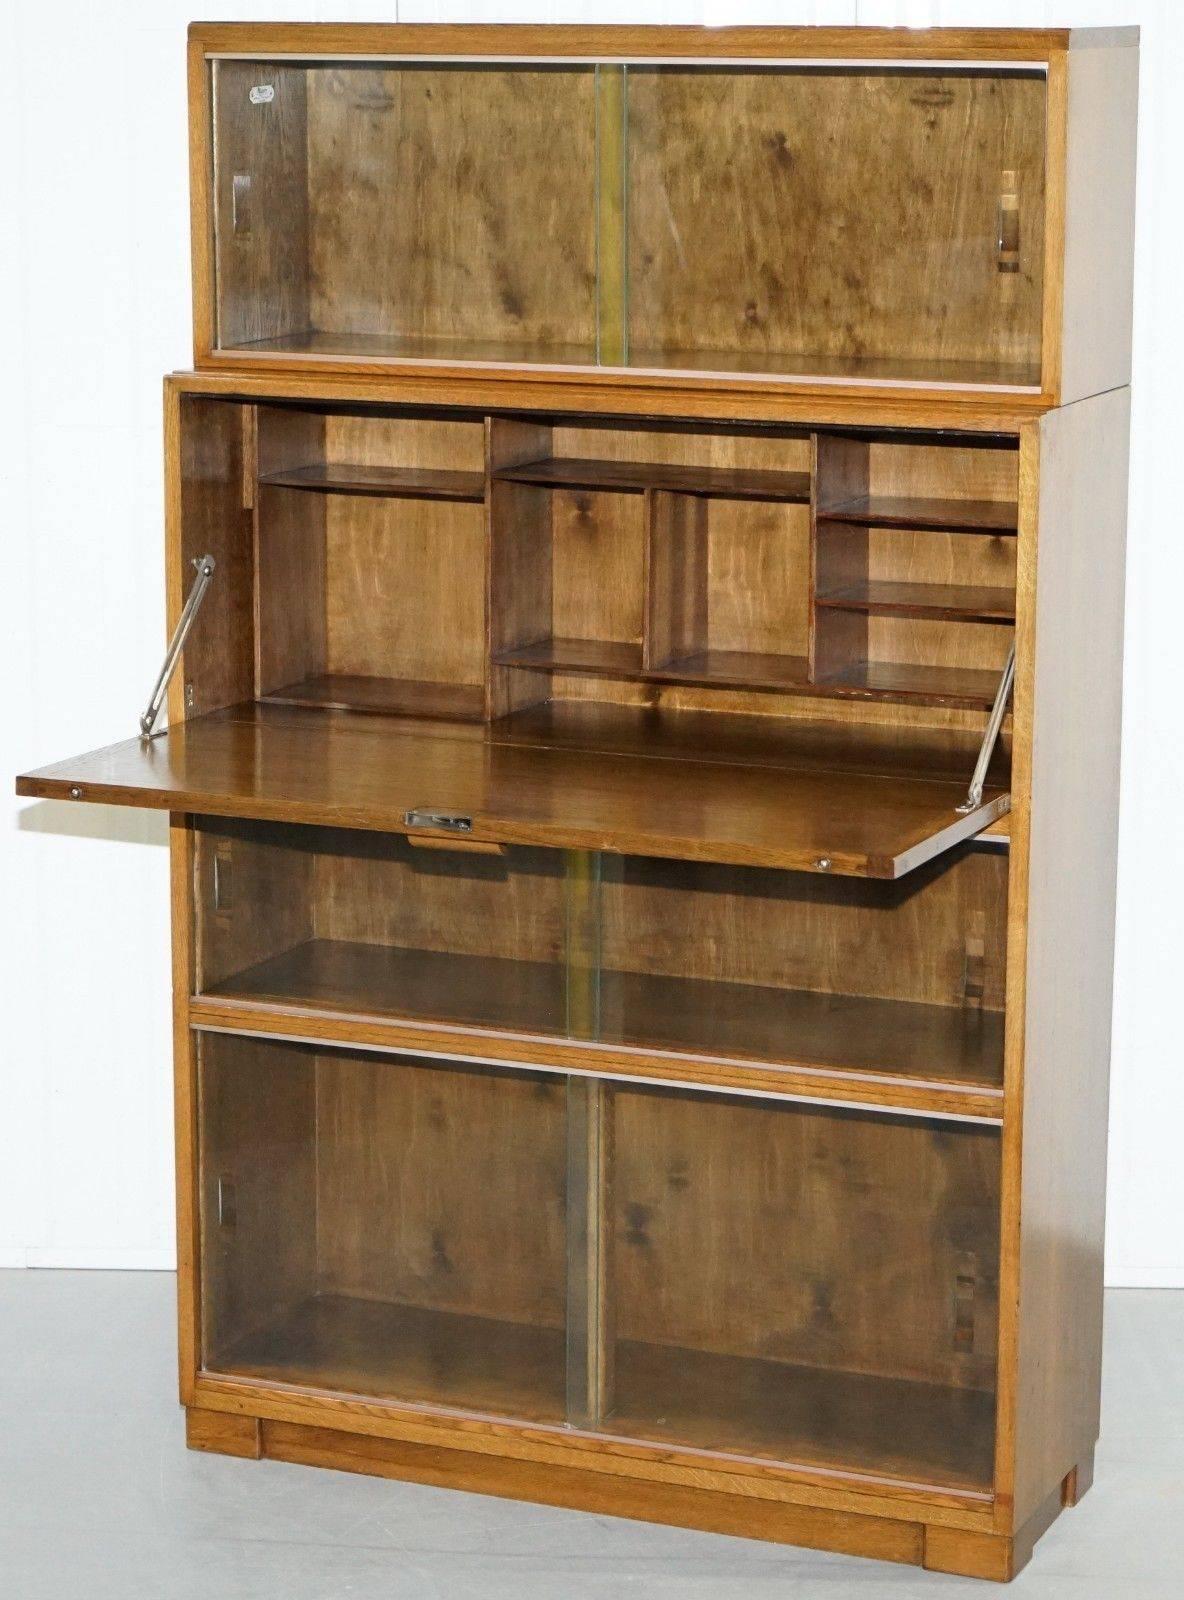 Hand-Crafted 1950s English Modular Minty Oxford Vintage Stacking Legal Bookcase Desk Tidy